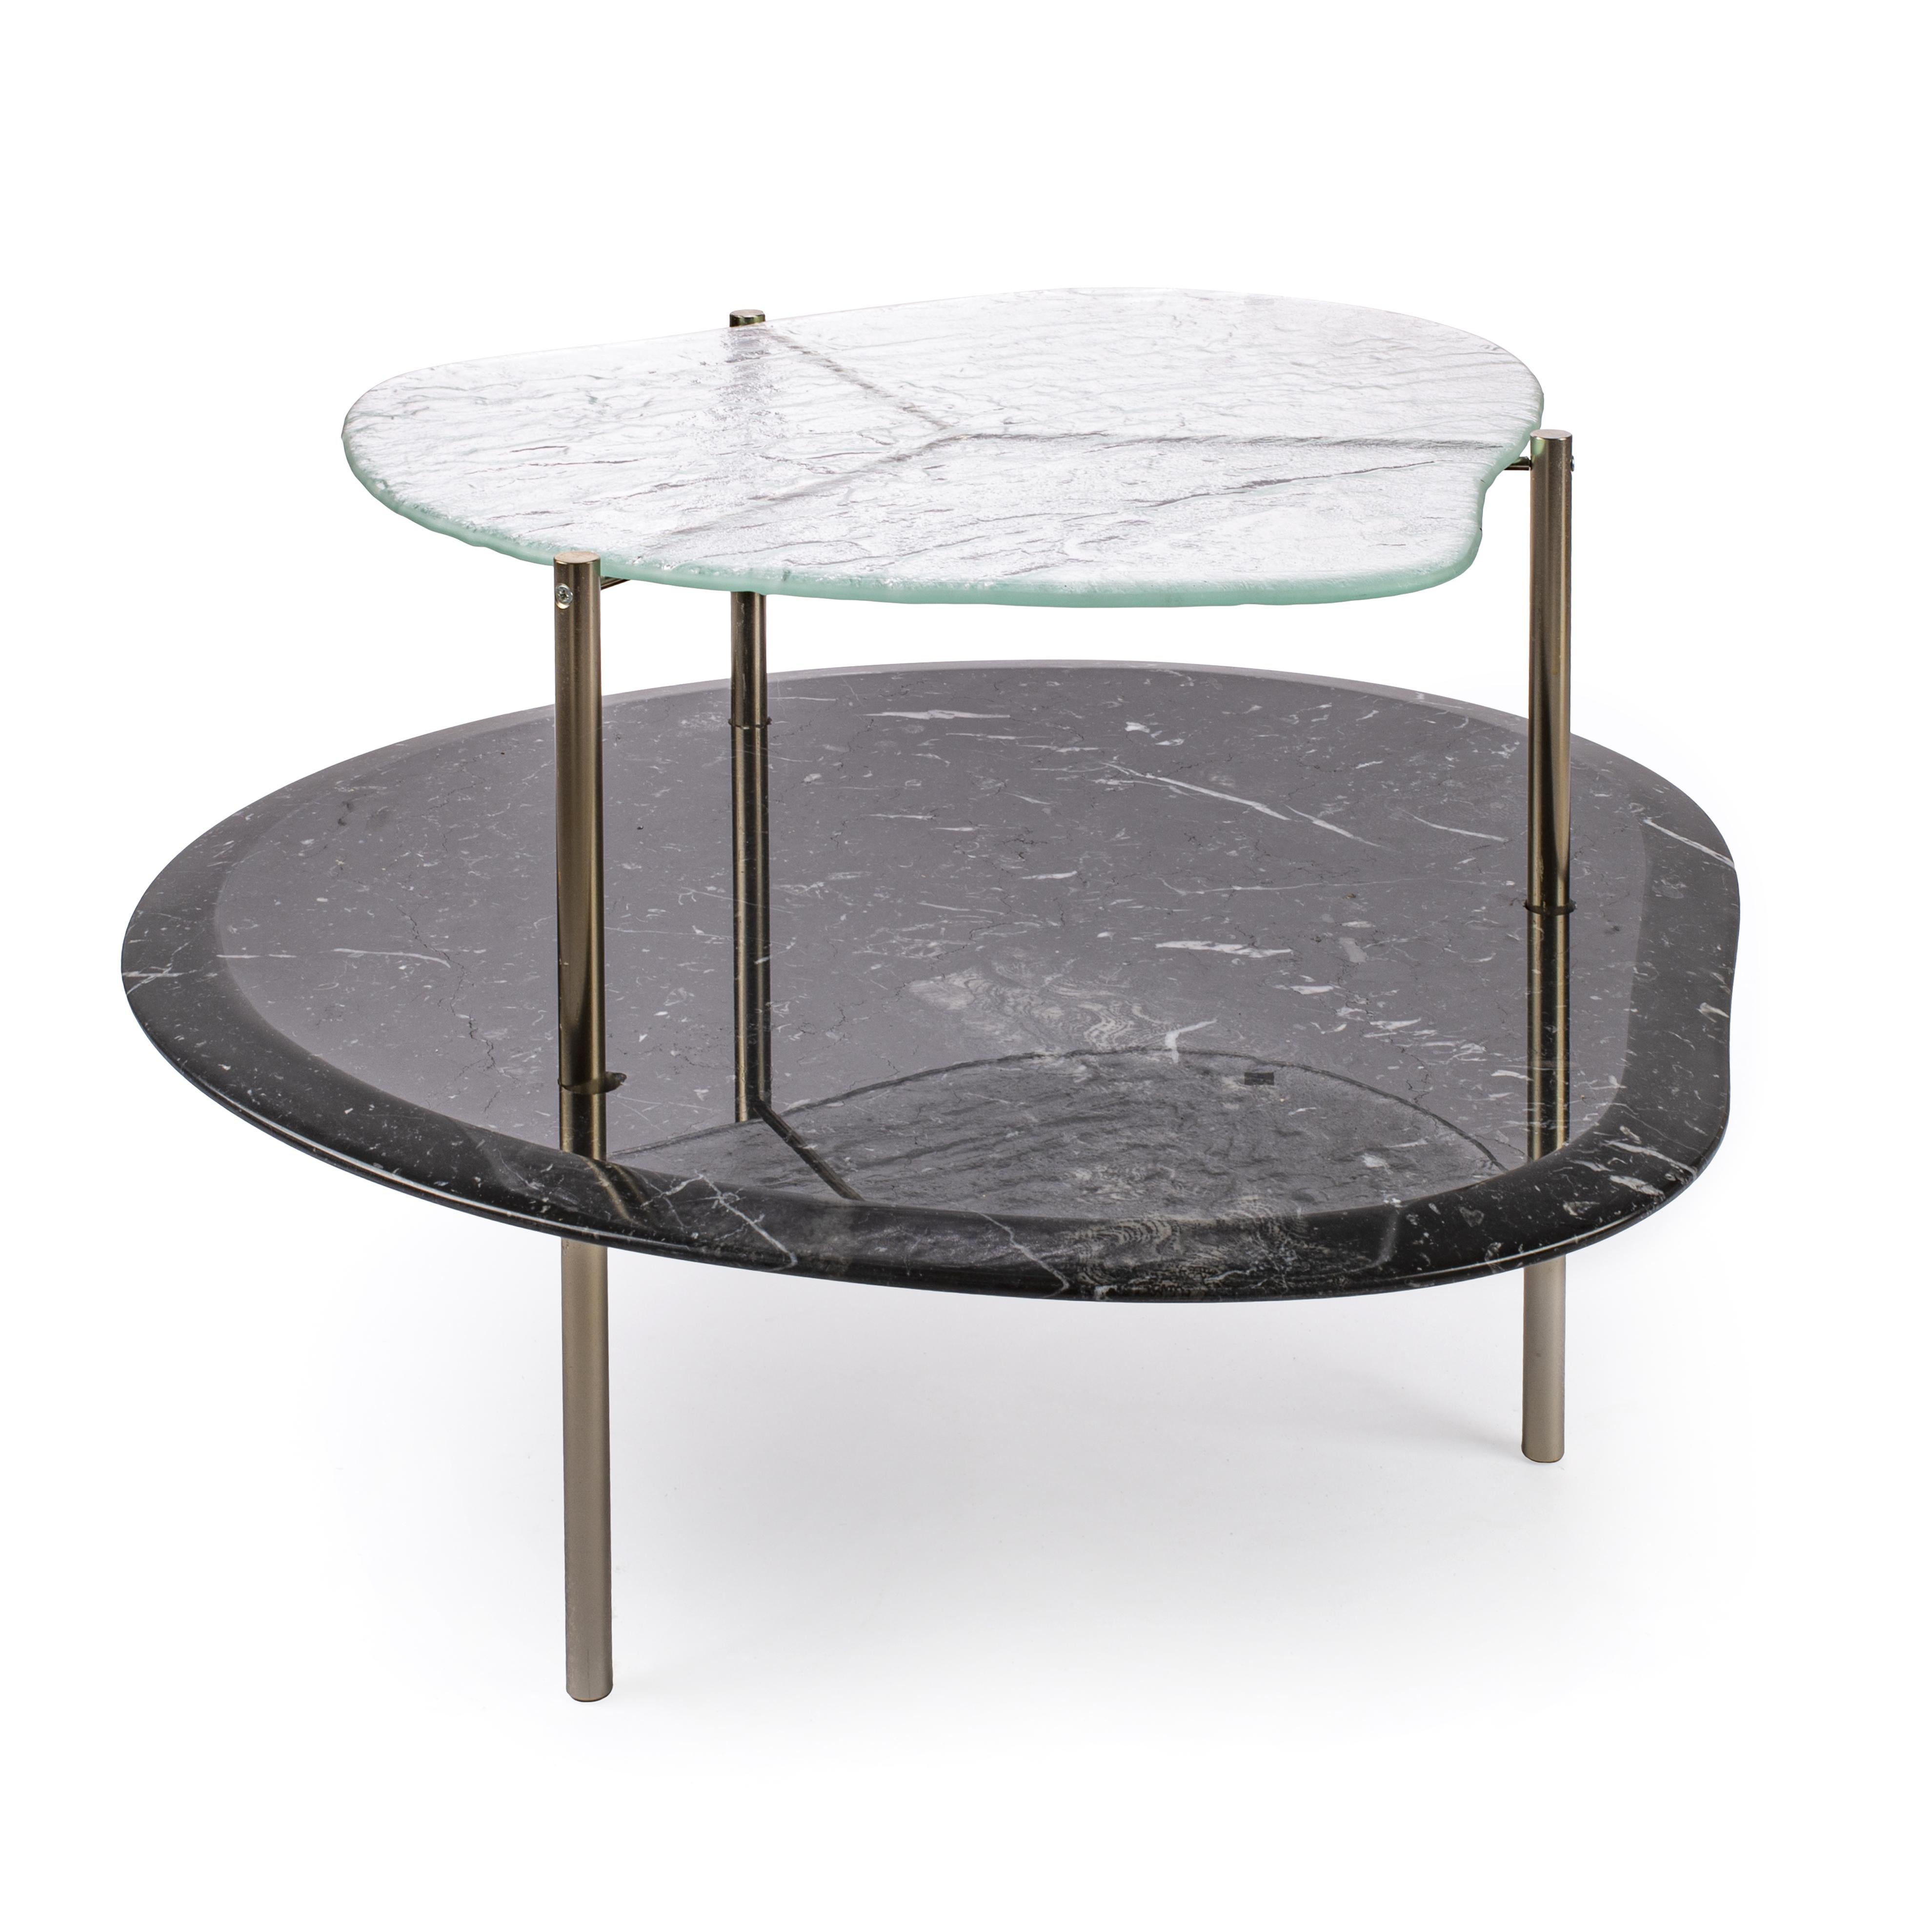 Table no.5 by Anežka Závadová
Materials: Textured fused glass, nori marble and steel skeleton in satin brass finish
Dimensions: 65.5 mm x 64.5 mm x 45 mm

Anezka Zavadova has been with Preciosa Lighting since 2016. As a senior designer in the